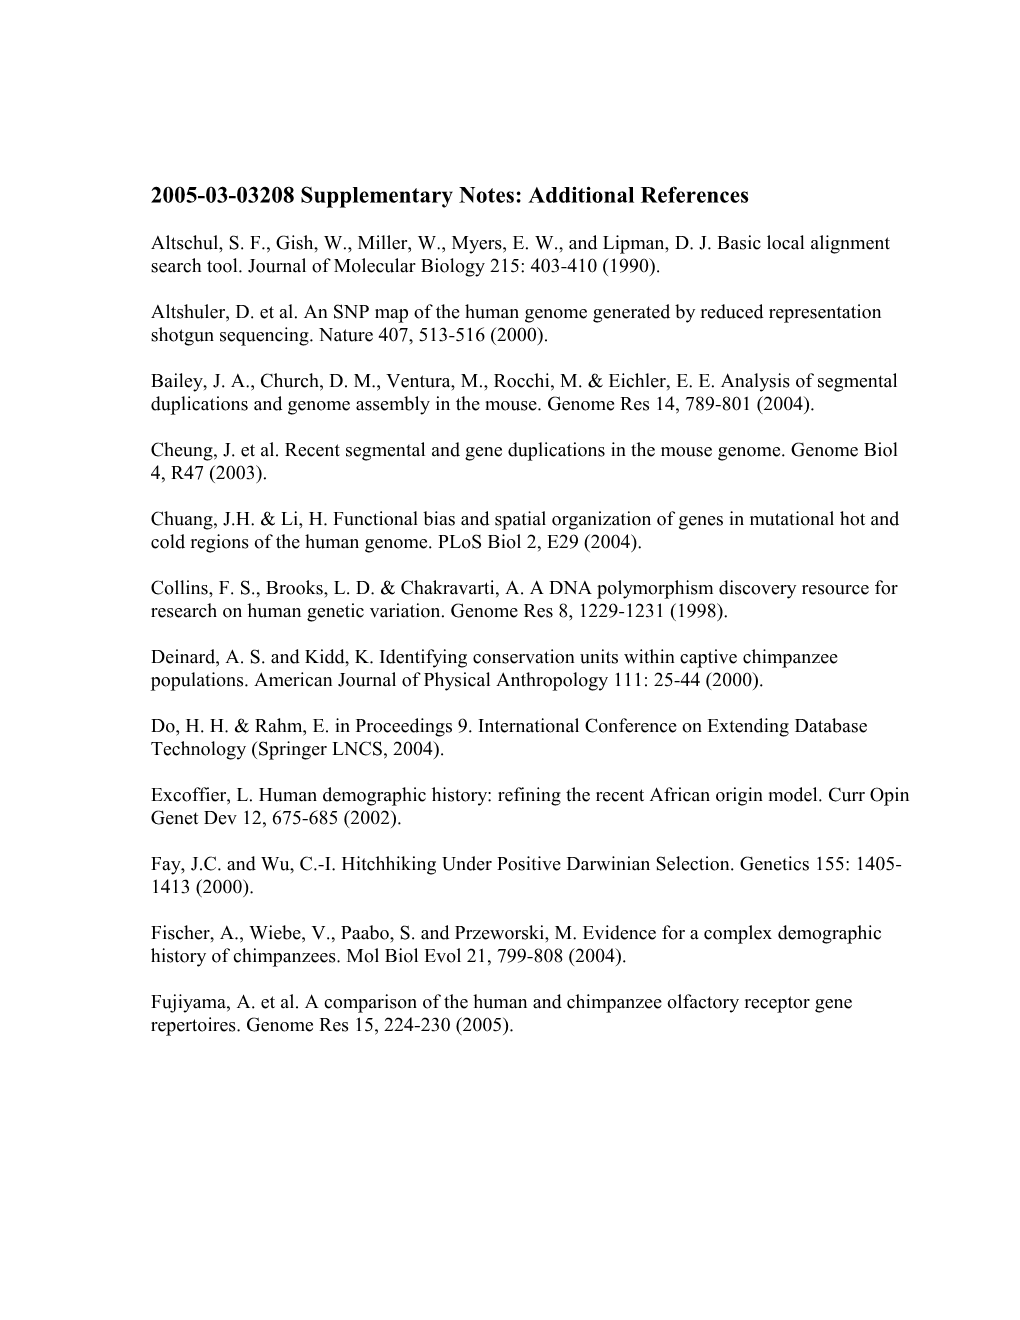 Supplementary Notes: Additional References